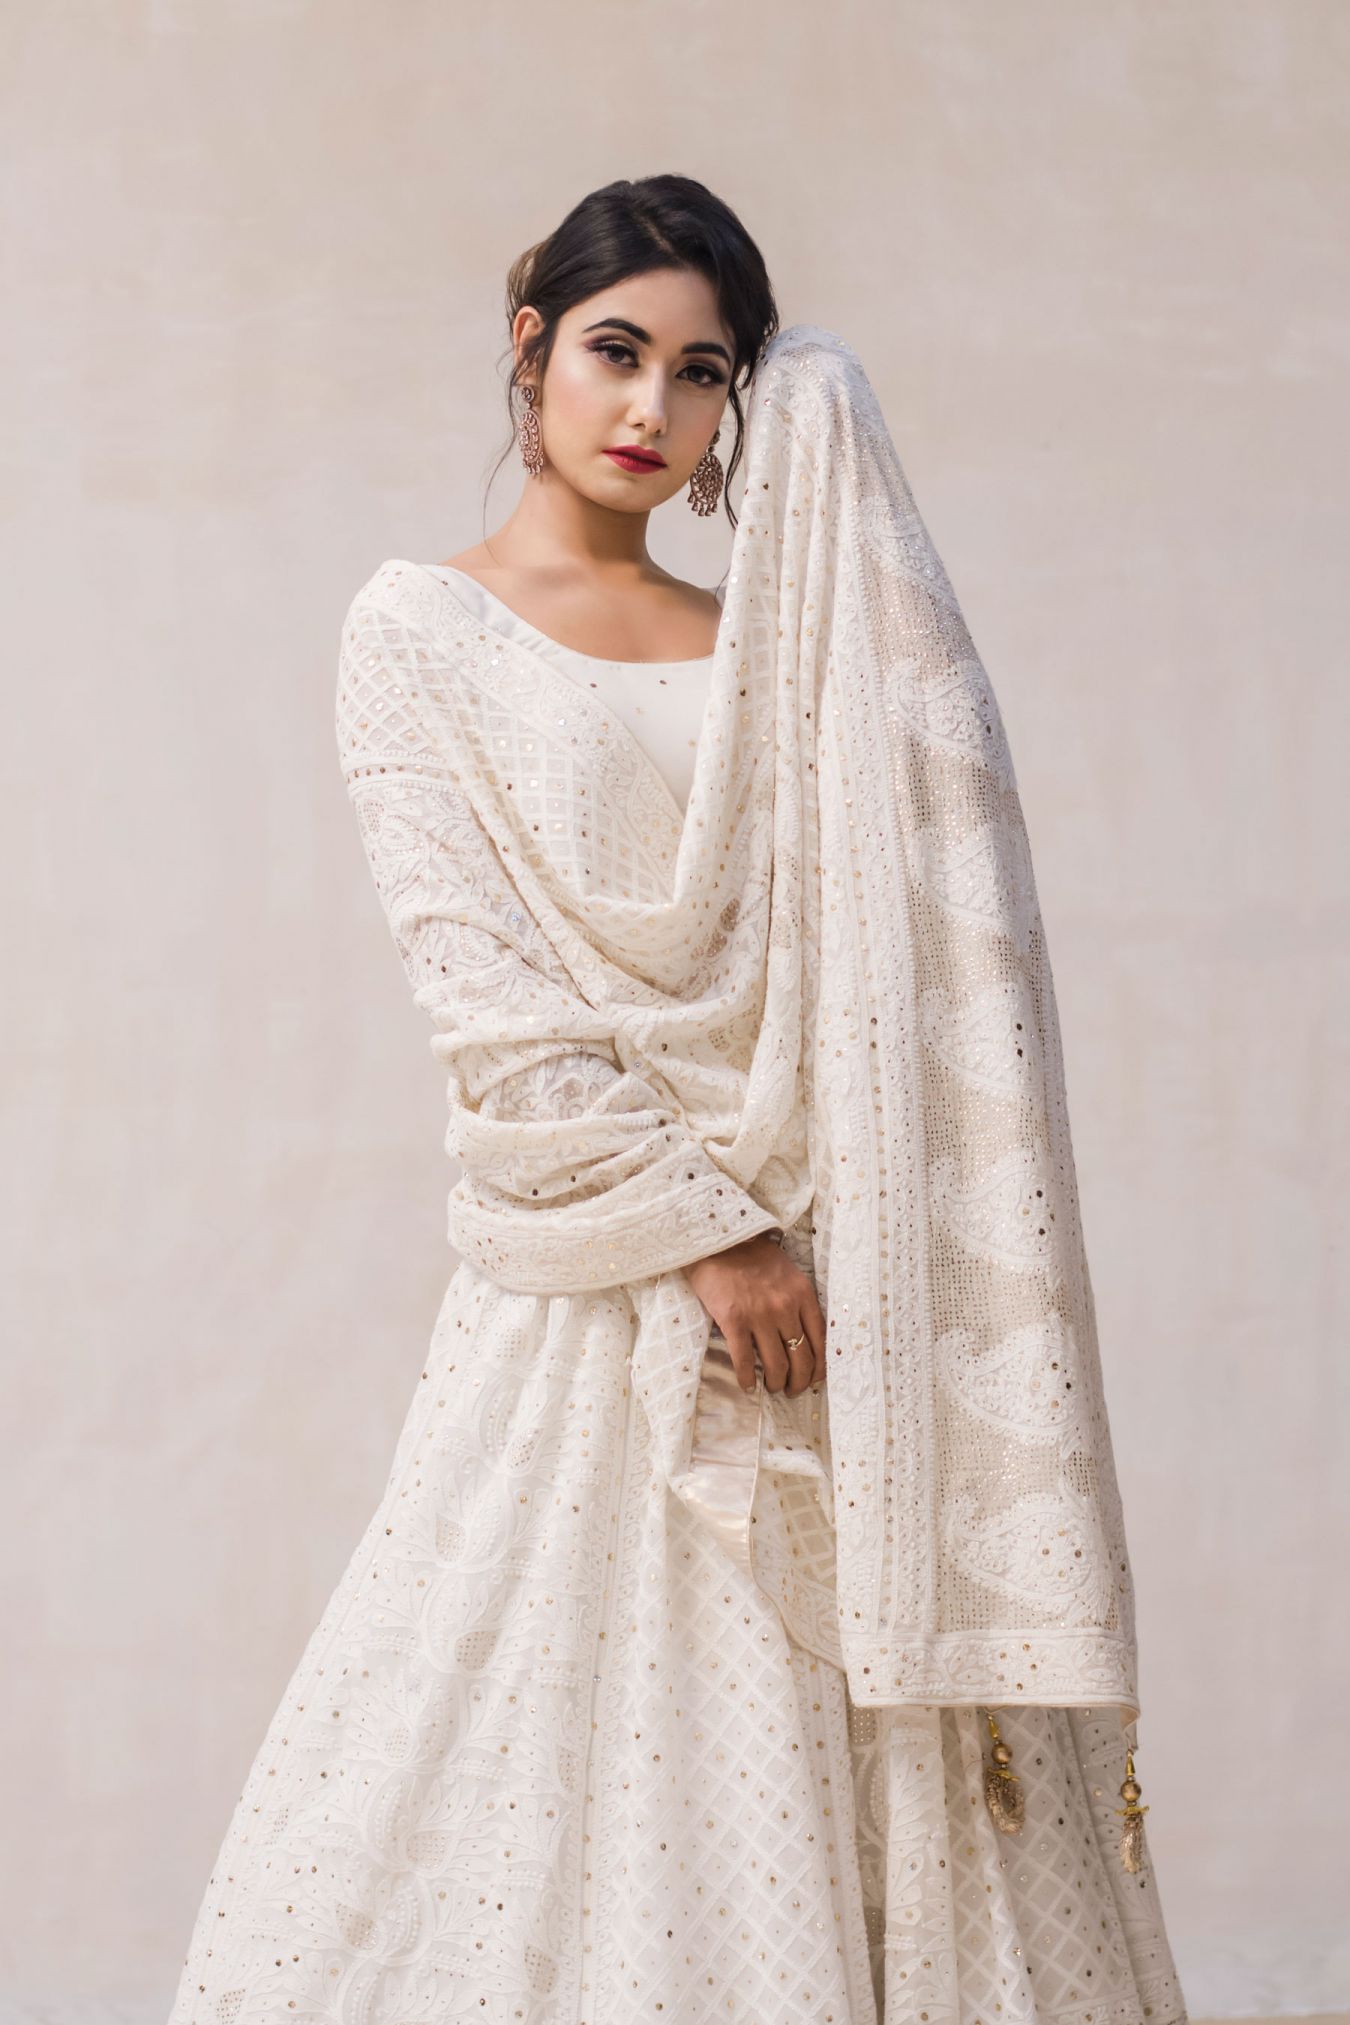 A Perfect Family Heirloom Piece of Traditionally Handcrafted Chikankari Lehenga in Classic Ivory.